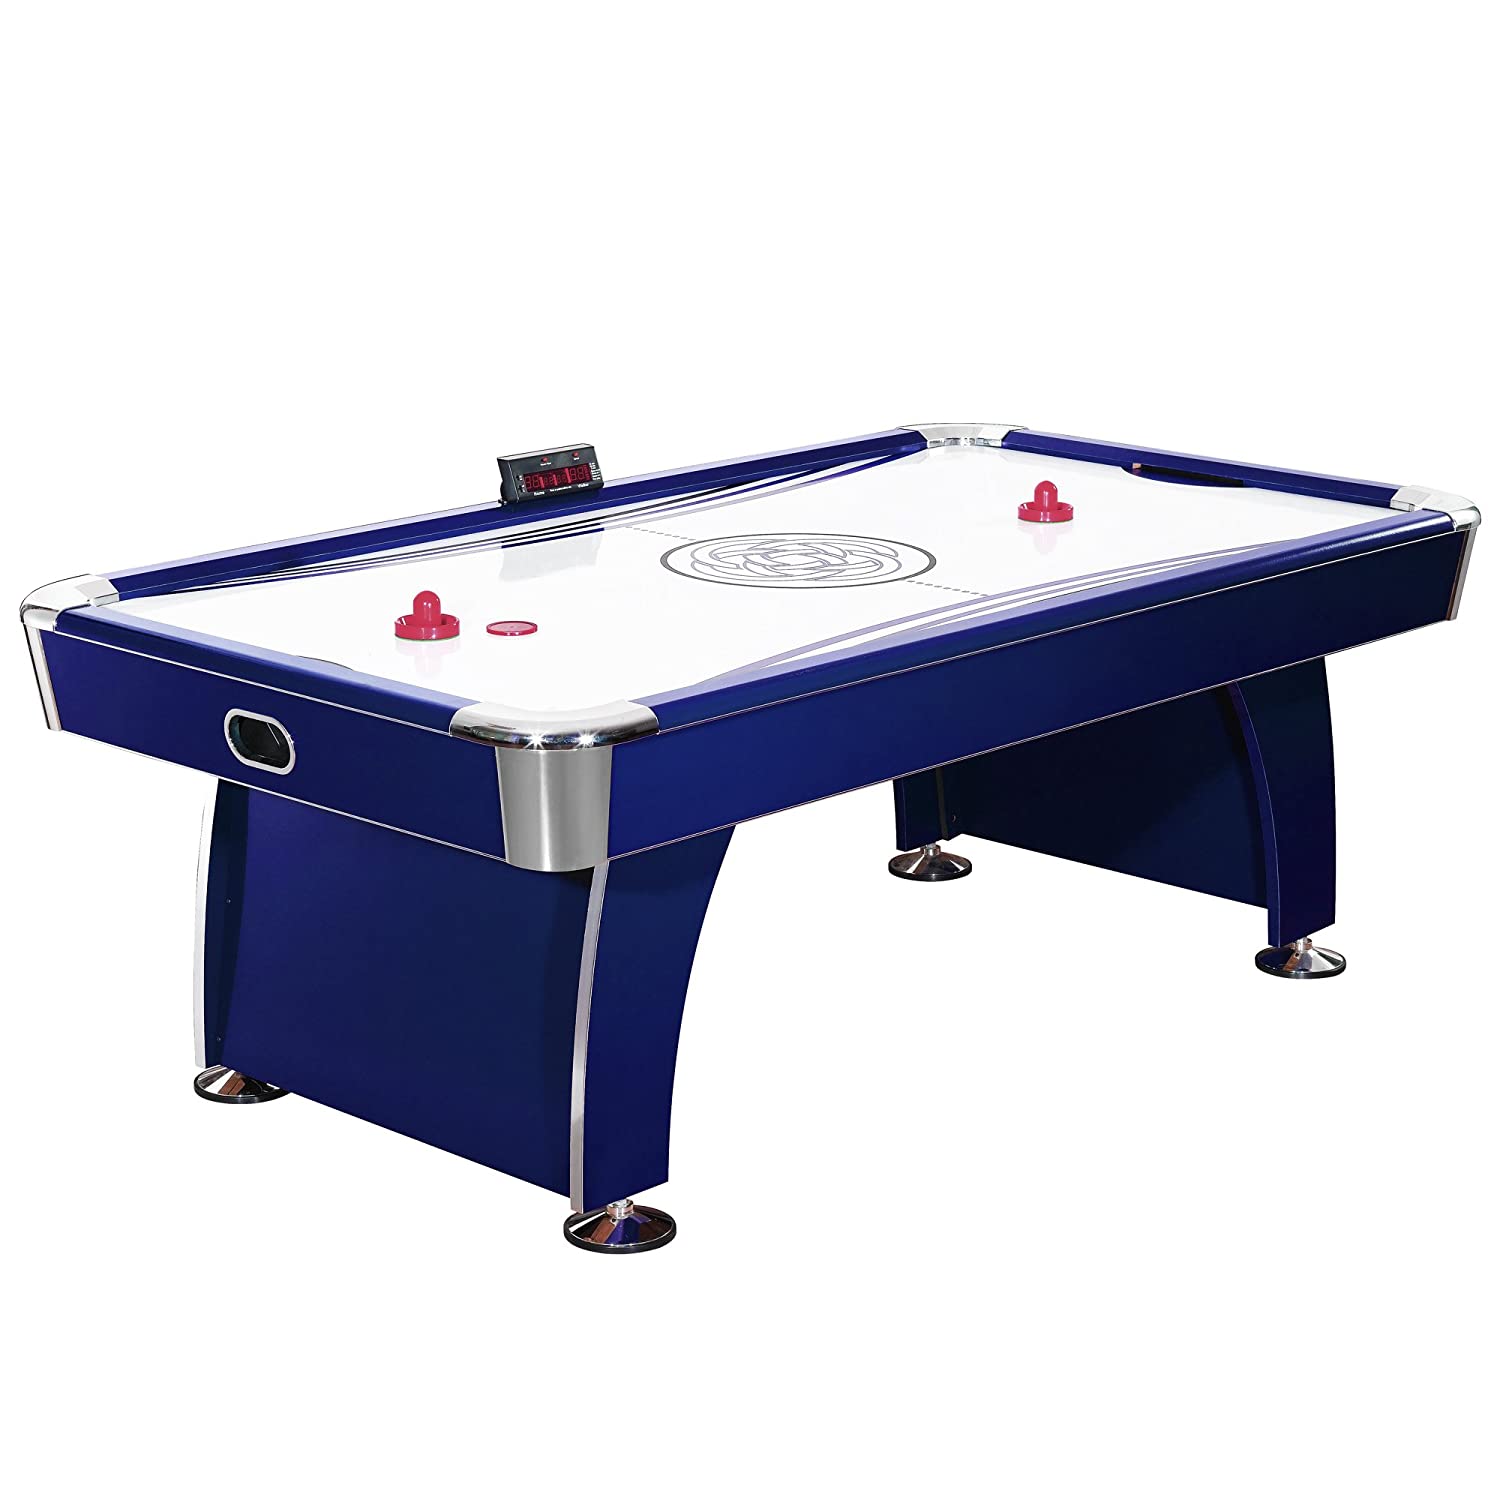 Hathaway Phantom 7.5-Foot Air Hockey Game Table for Kids and Adults, with Electronic Scoring